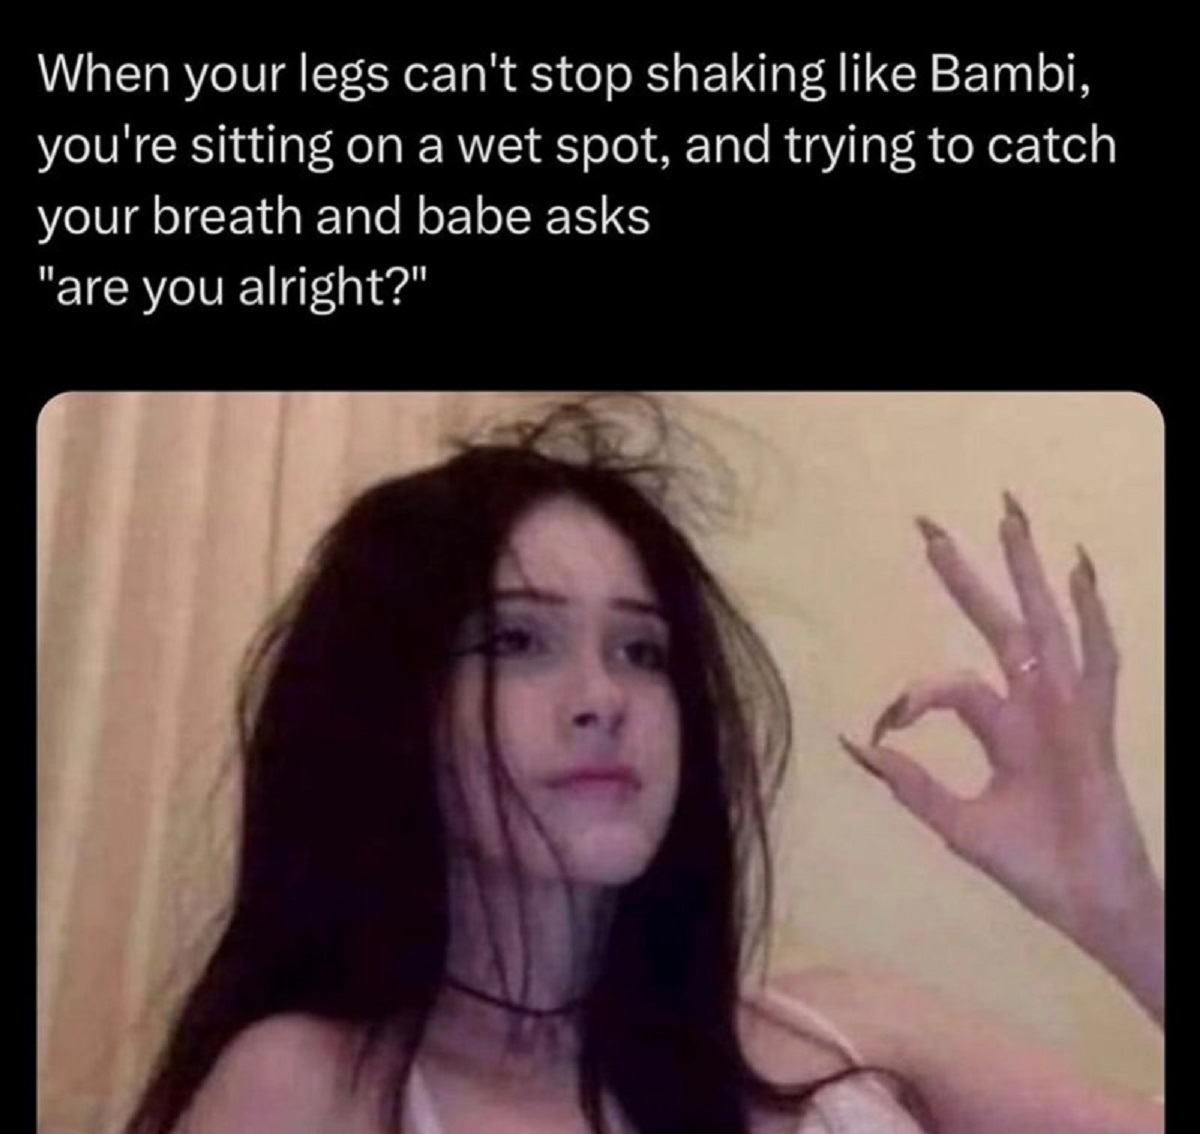 spicy memes -  photo caption - When your legs can't stop shaking Bambi, you're sitting on a wet spot, and trying to catch your breath and babe asks "are you alright?"